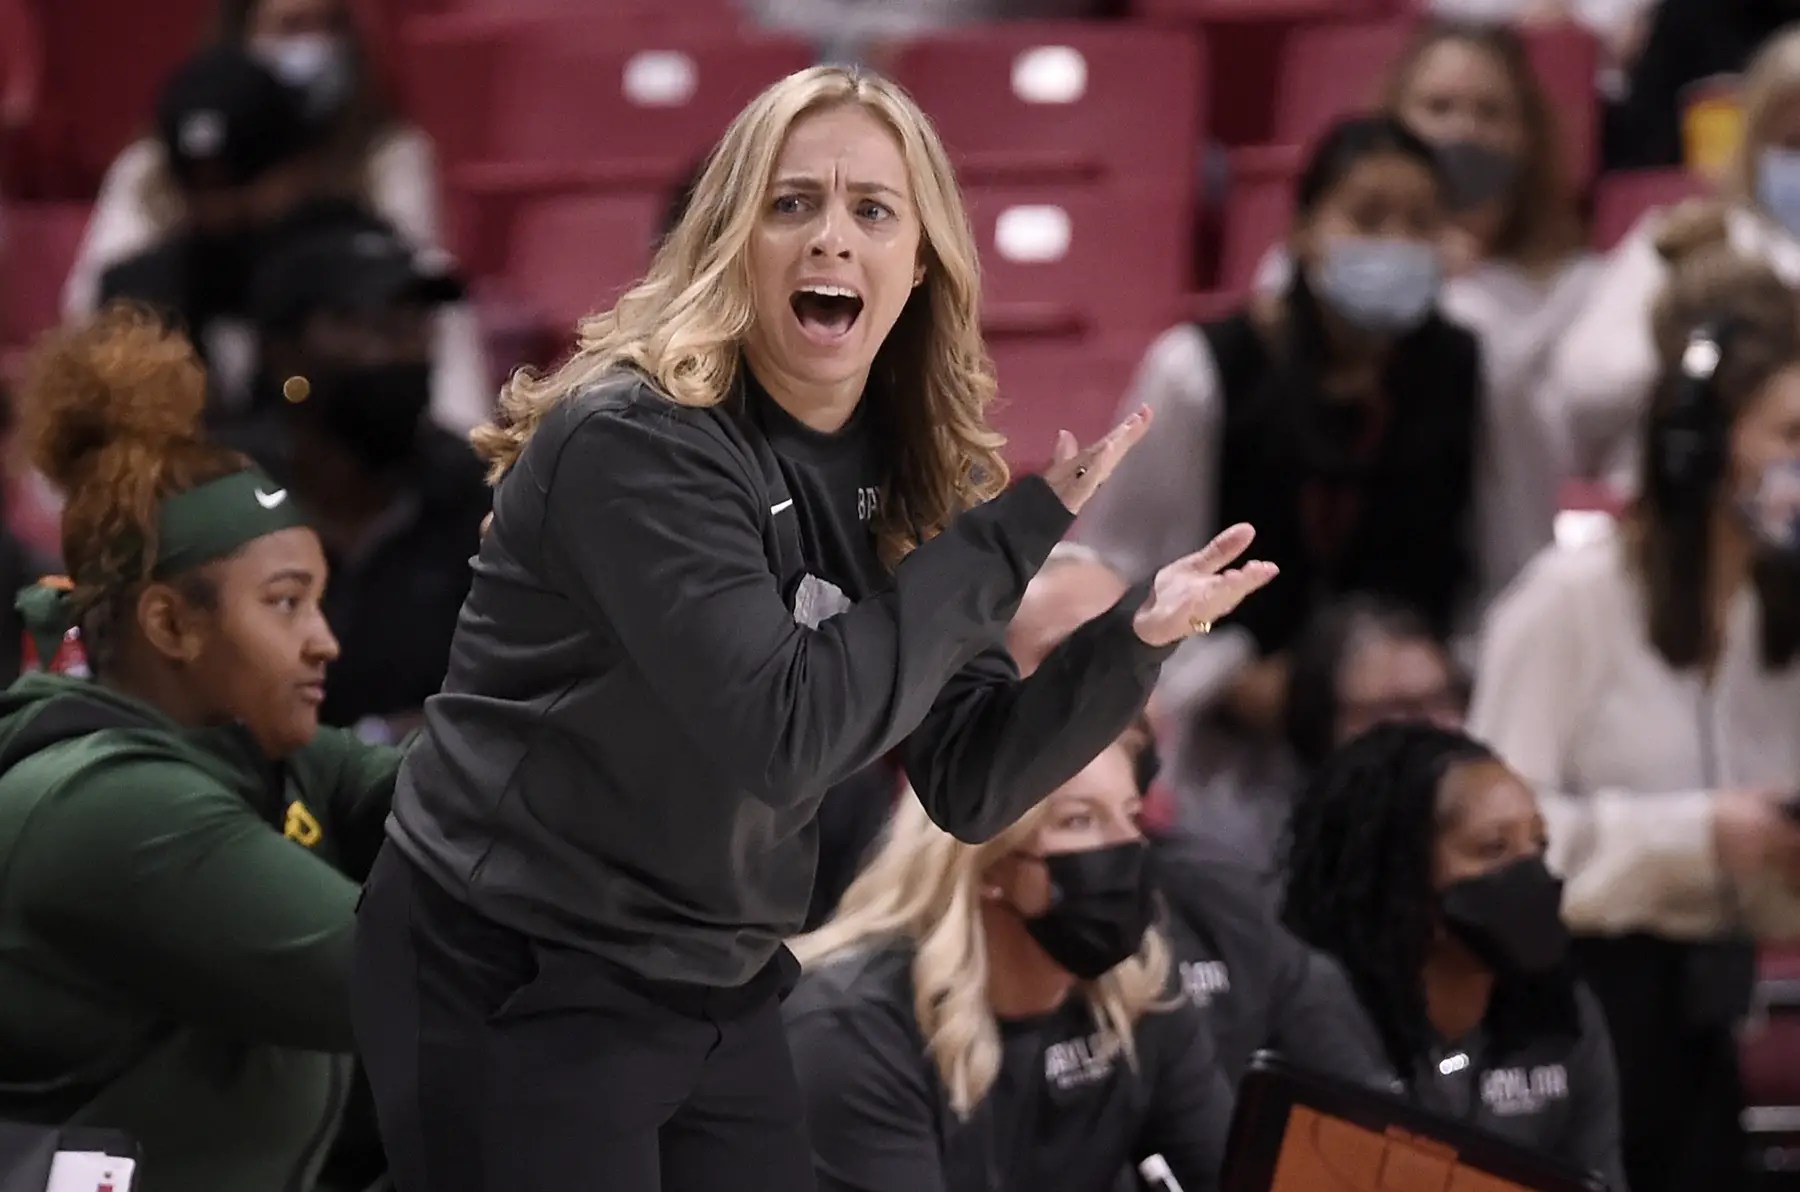 Head coach Nicki Collen of the Baylor Lady Bears watches the basketball game from the sidelines.